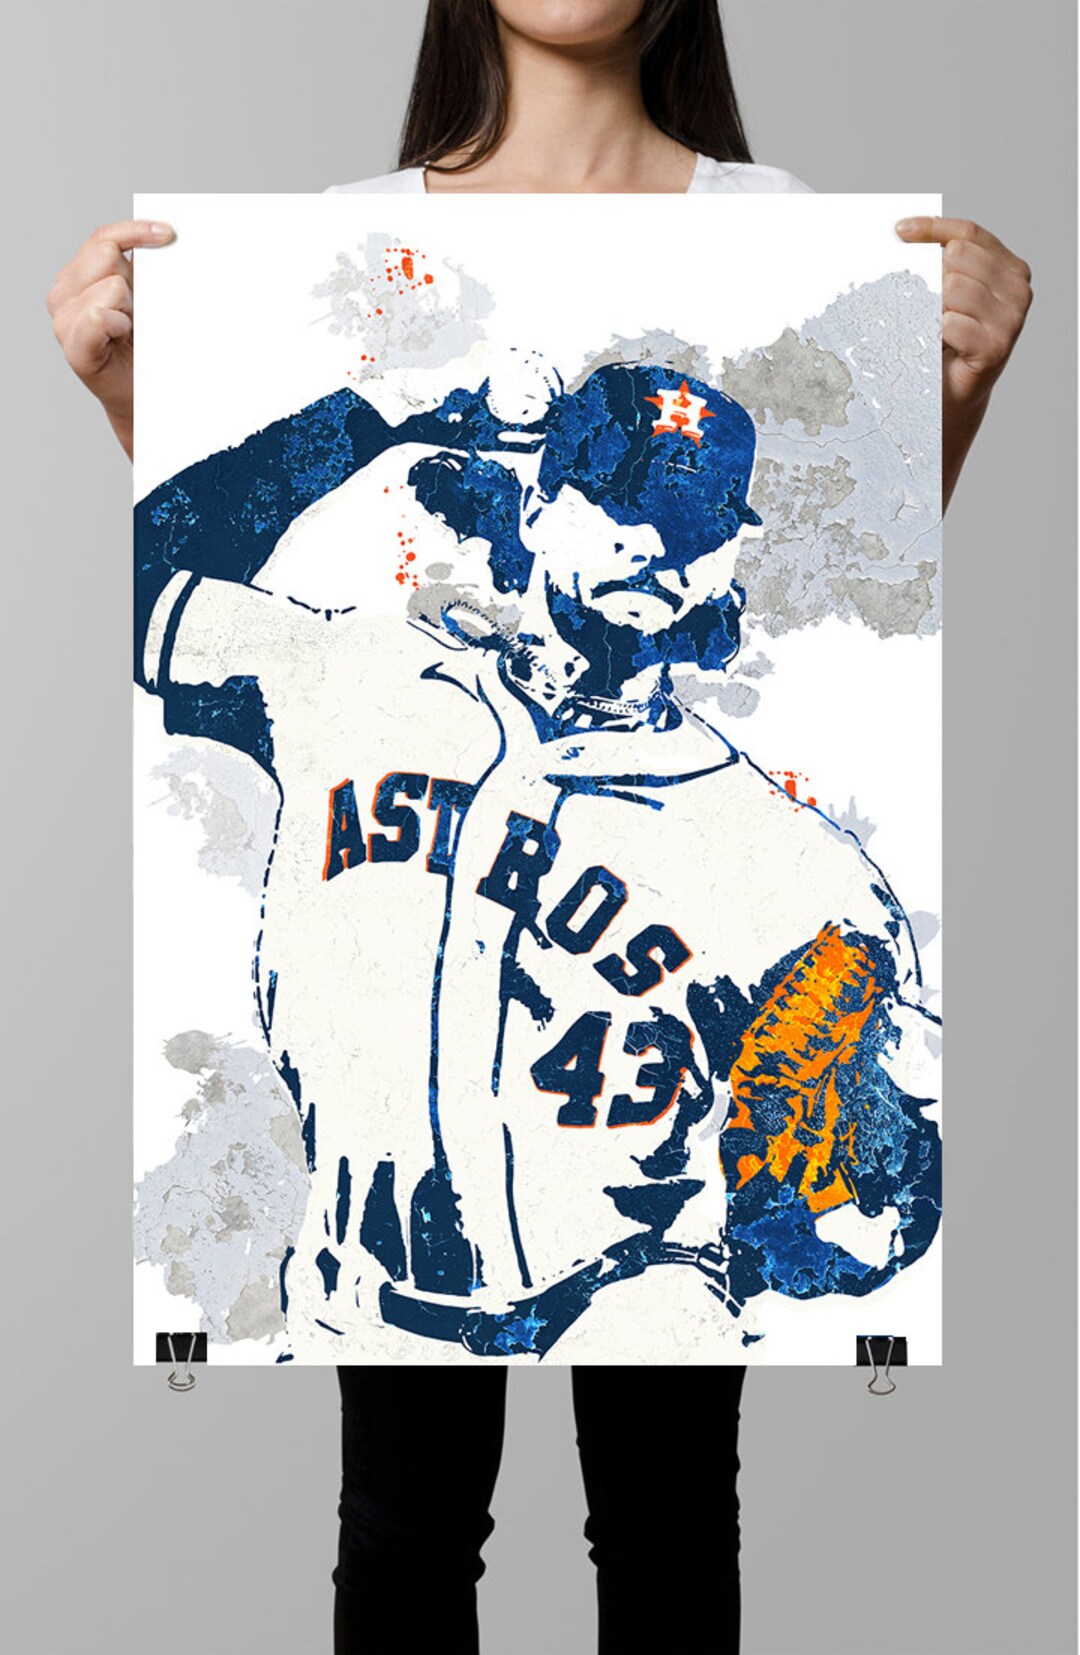 Houston Astros fans need this Lance McCullers Jr. shirt